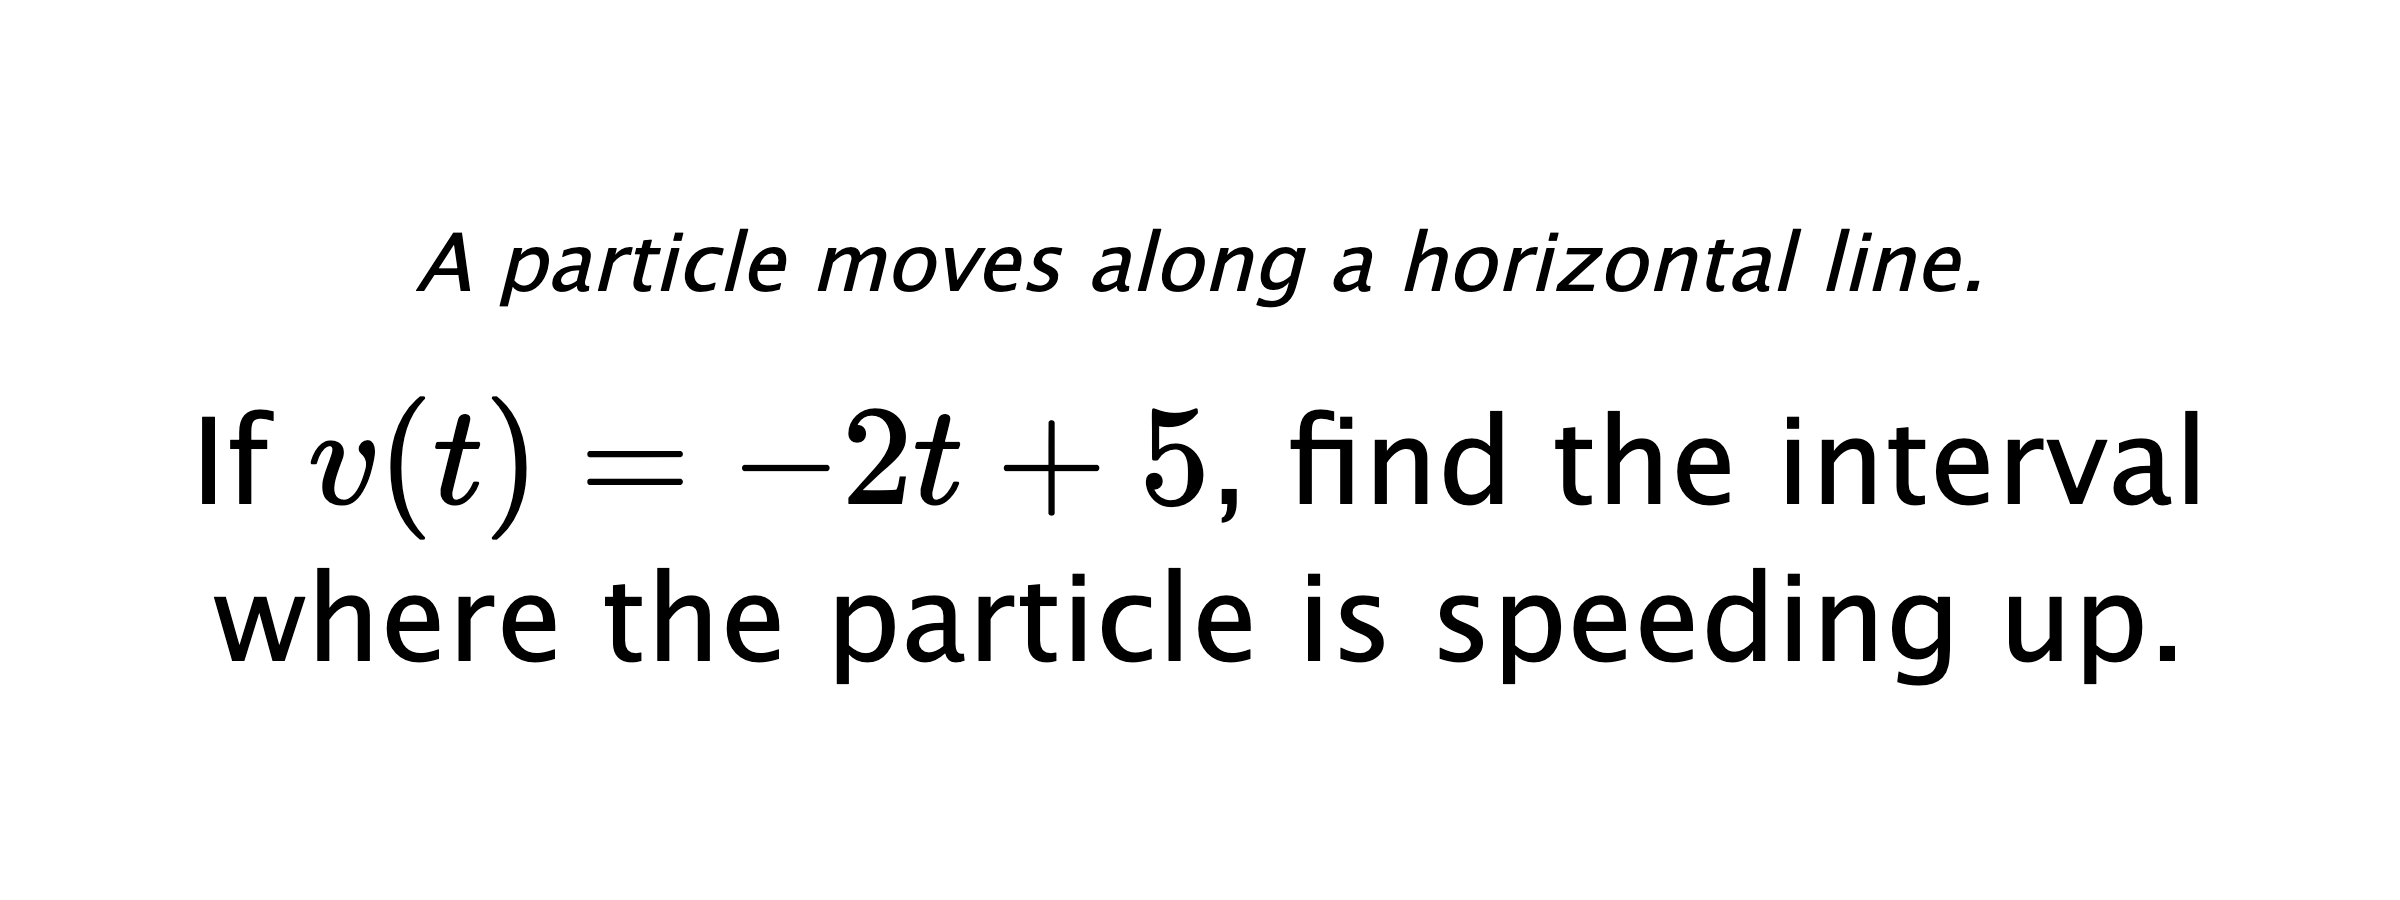 A particle moves along a horizontal line. If $ v(t)=-2t+5 $, find the interval where the particle is speeding up.